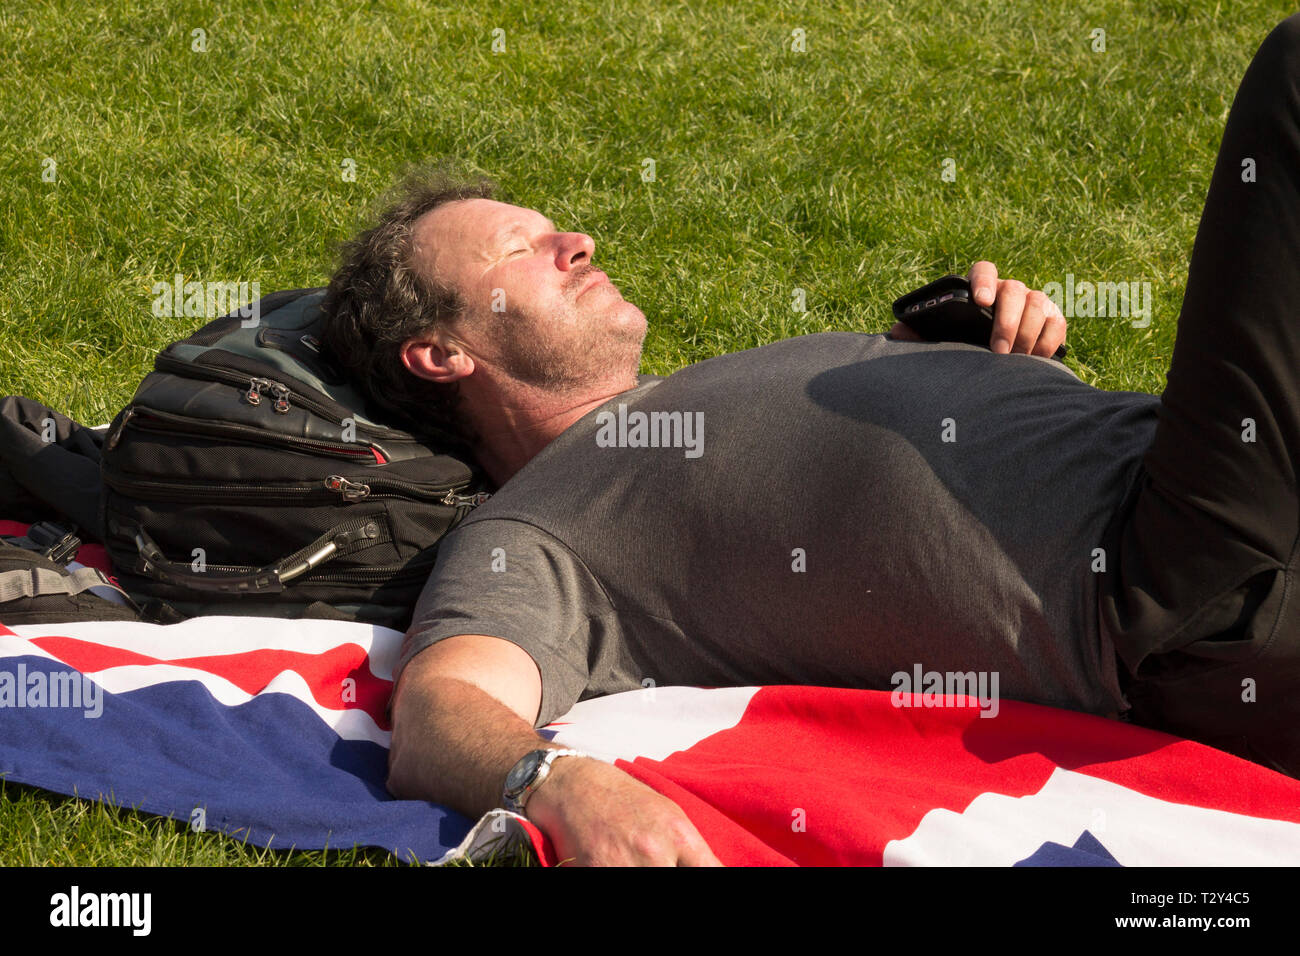 Man lying on the grass on a British flag Stock Photo